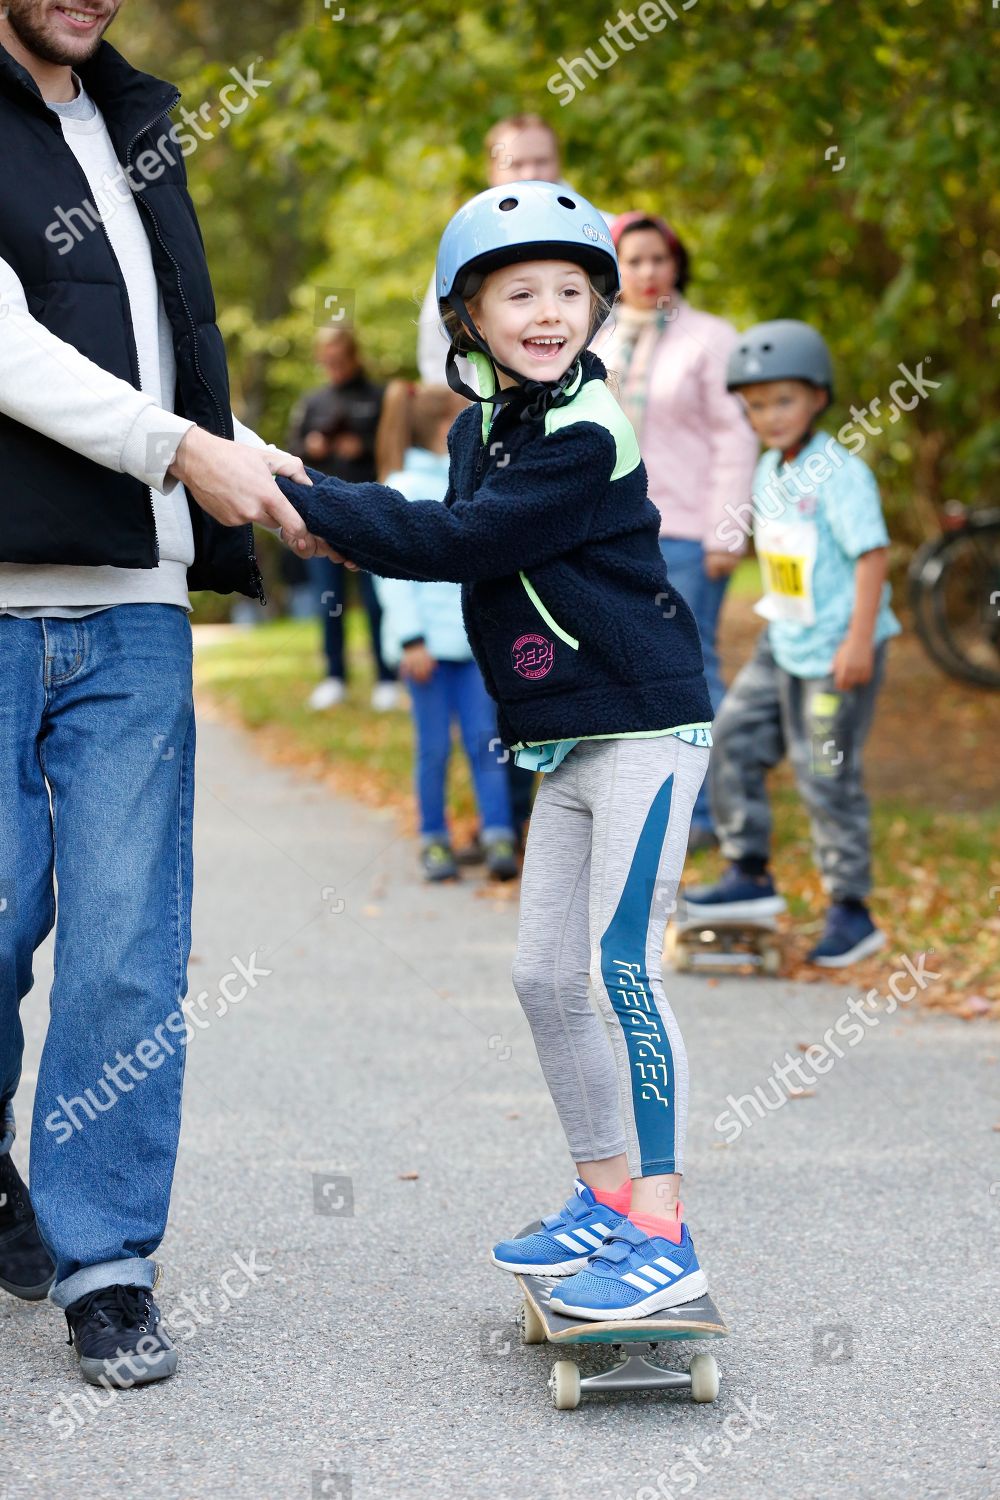 race-and-pep-day-stockholm-sweden-shutterstock-editorial-9884111s.jpg